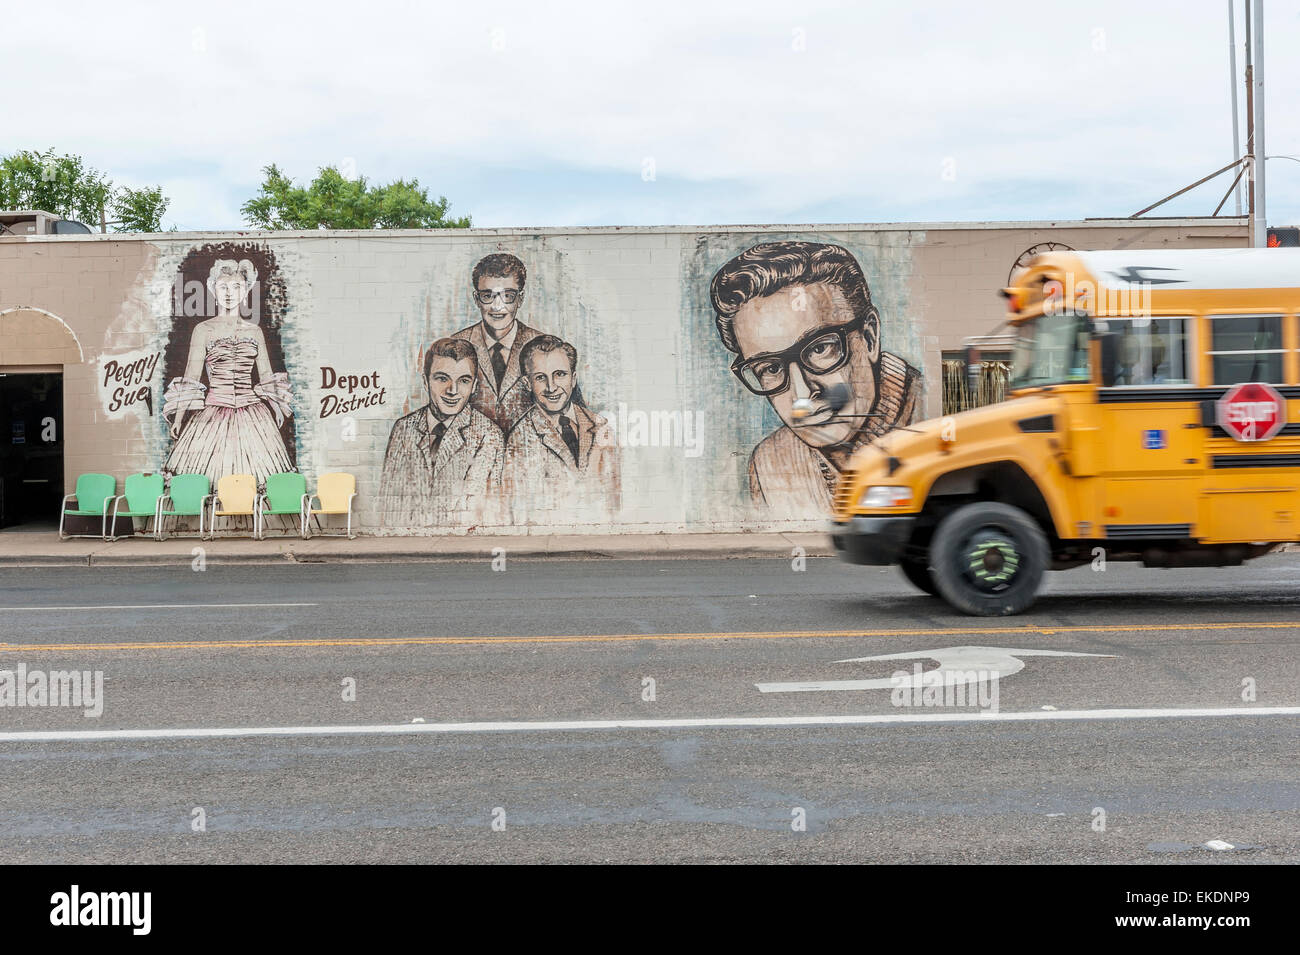 Wall art featuring Buddy Holly, Depot District, Lubbock. Texas. USA Stock Photo